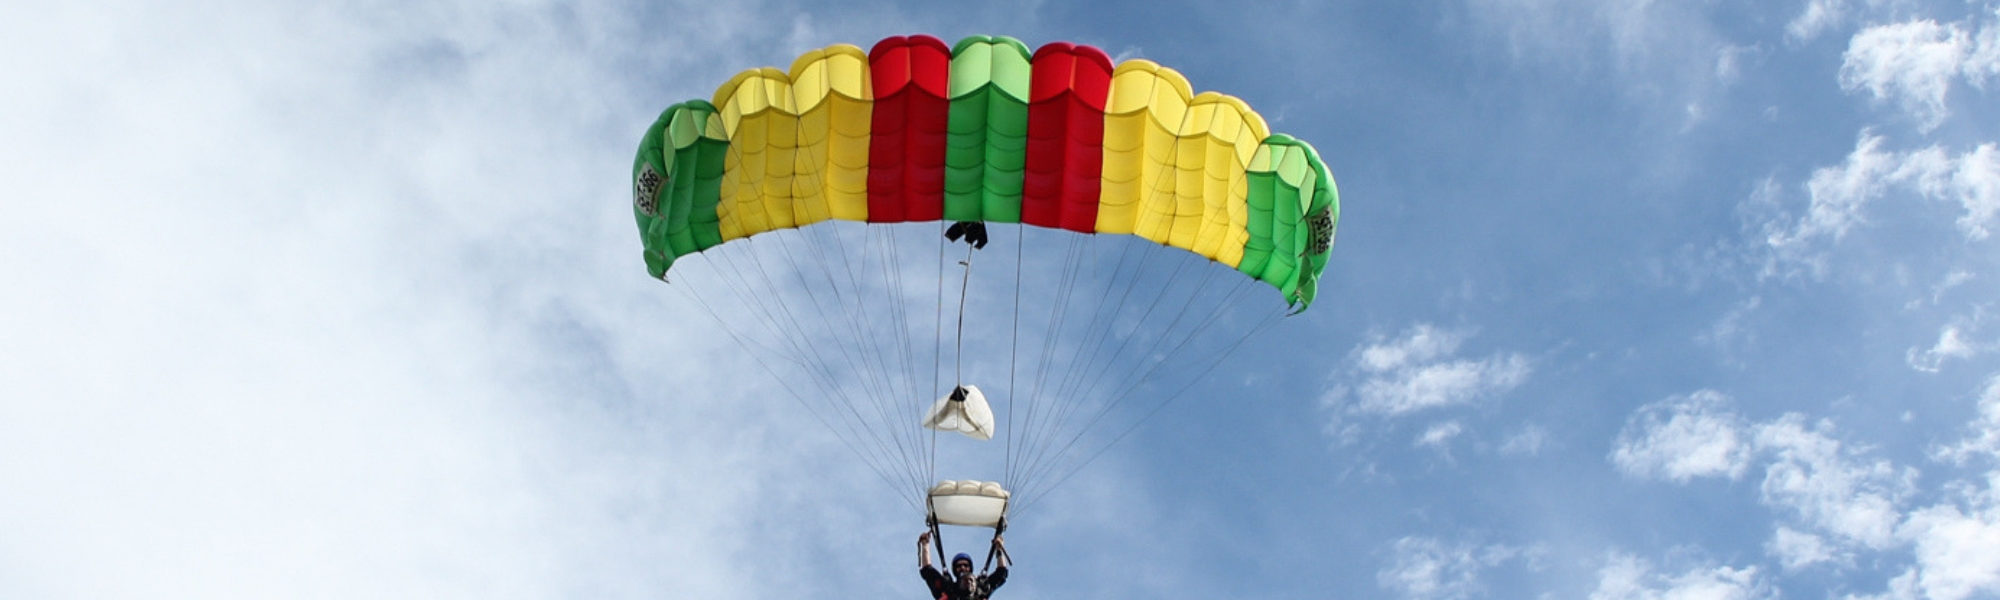 parachute canopy skydiving